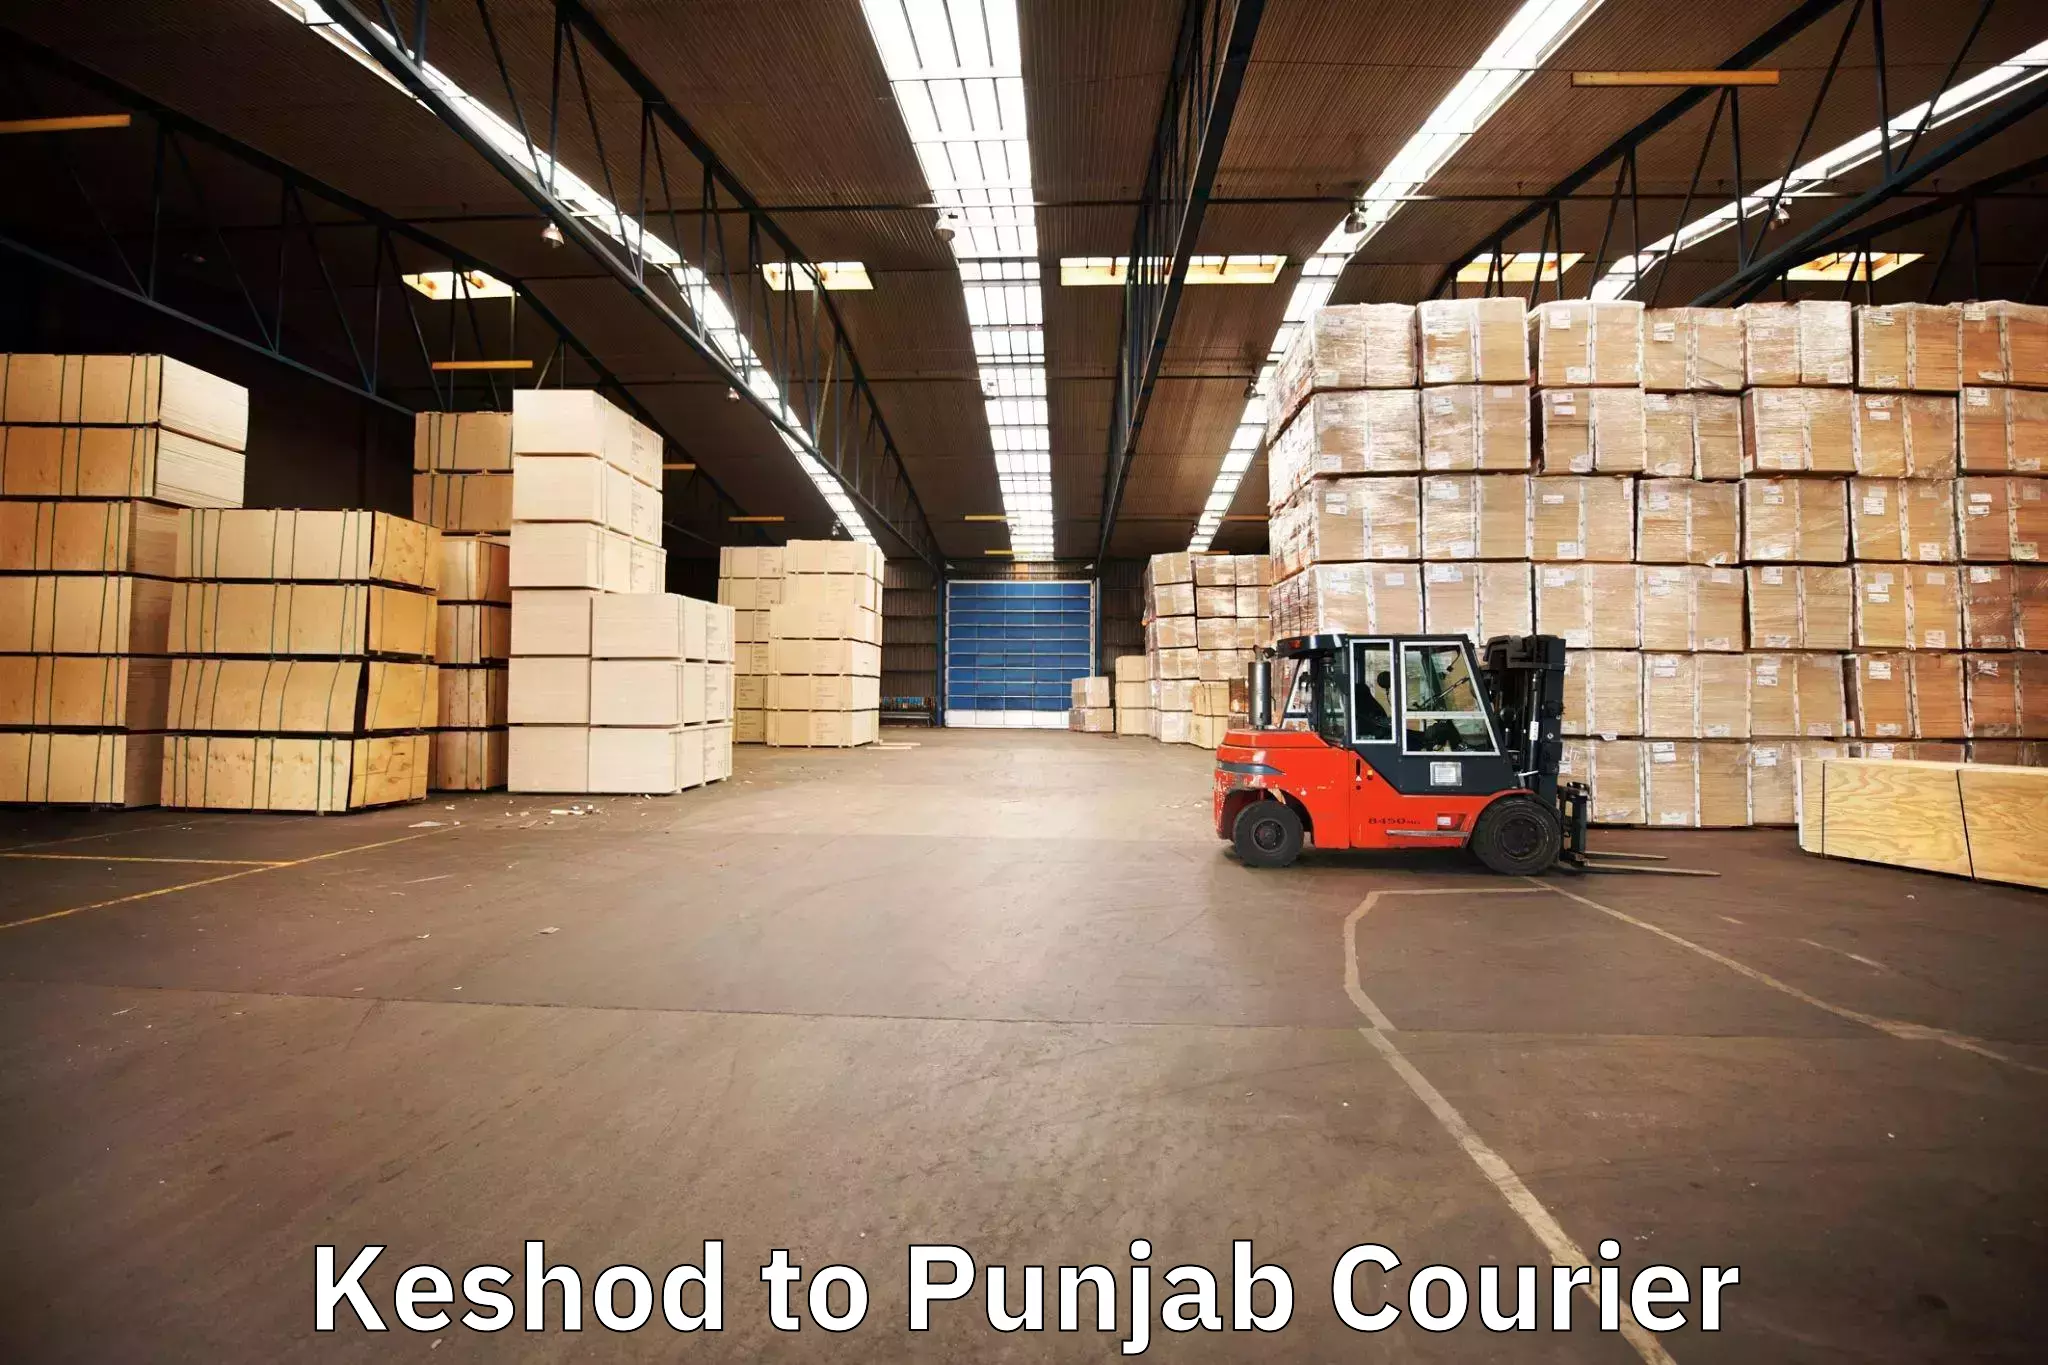 Moving service excellence Keshod to Punjab